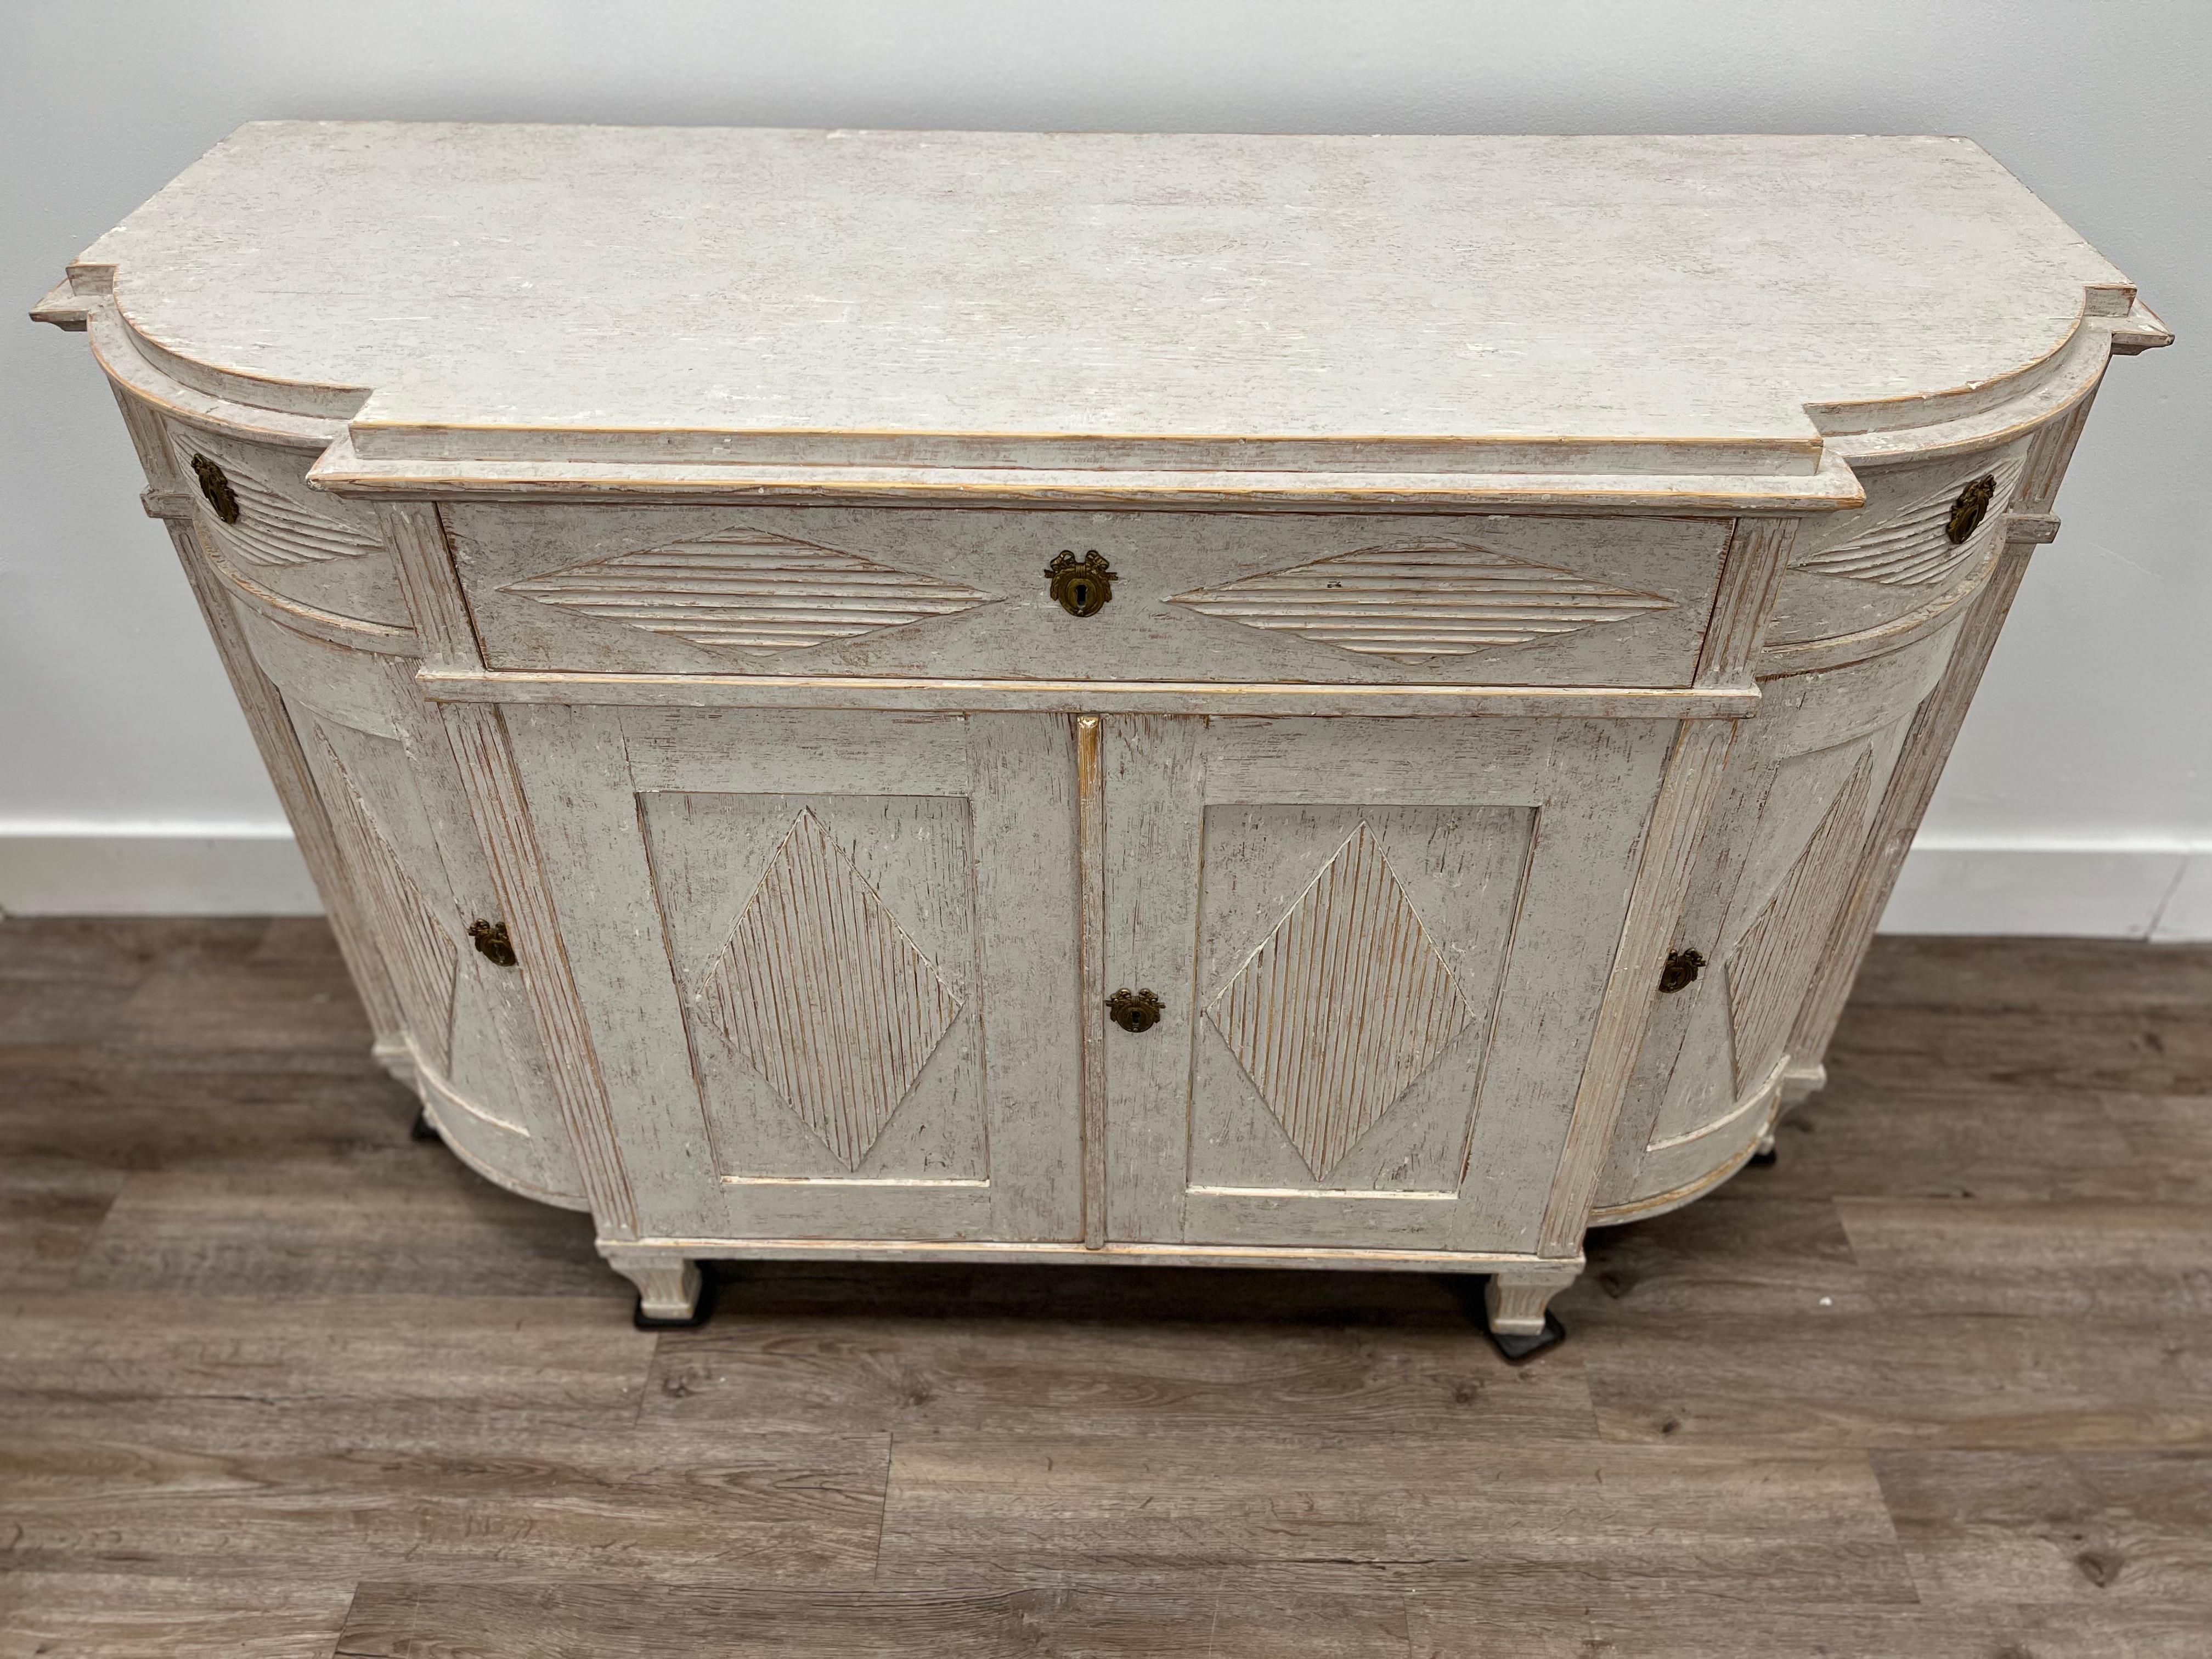 A long Gustavian style sideboard with original brass hardware and locks. Featuring a raised top and curved corners with horizontal diamond-shaped reed detail on the drawer fronts and vertical diamond-shaped reed detail on the door fronts. Behind the